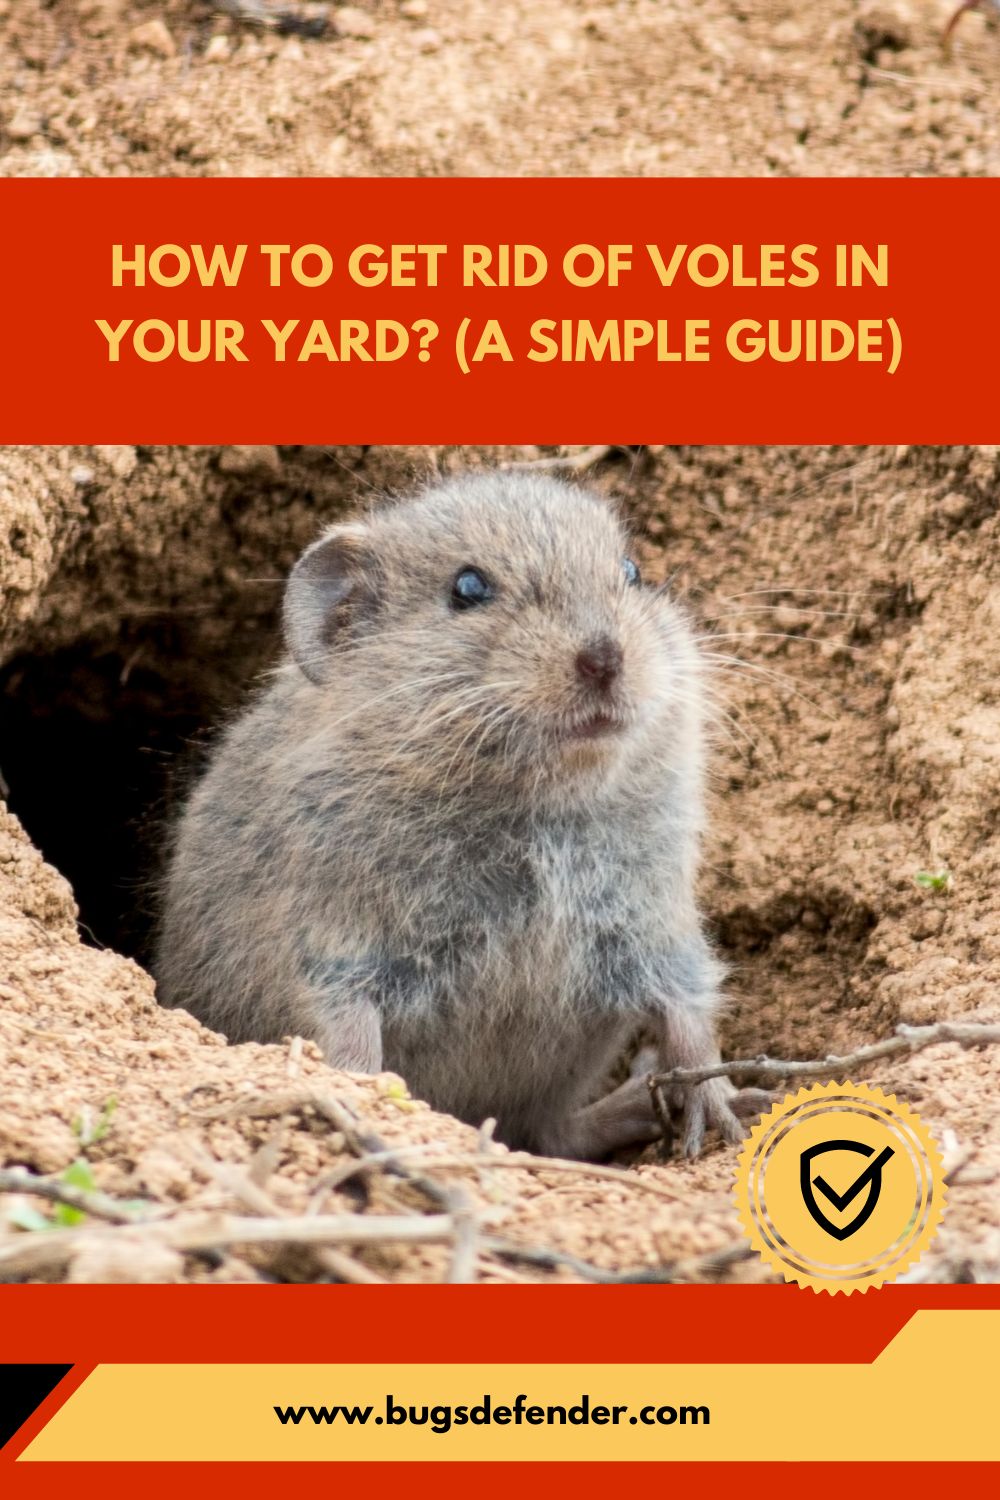 How To Get Rid Of Voles In Your Yard (A Simple Guide) pin2